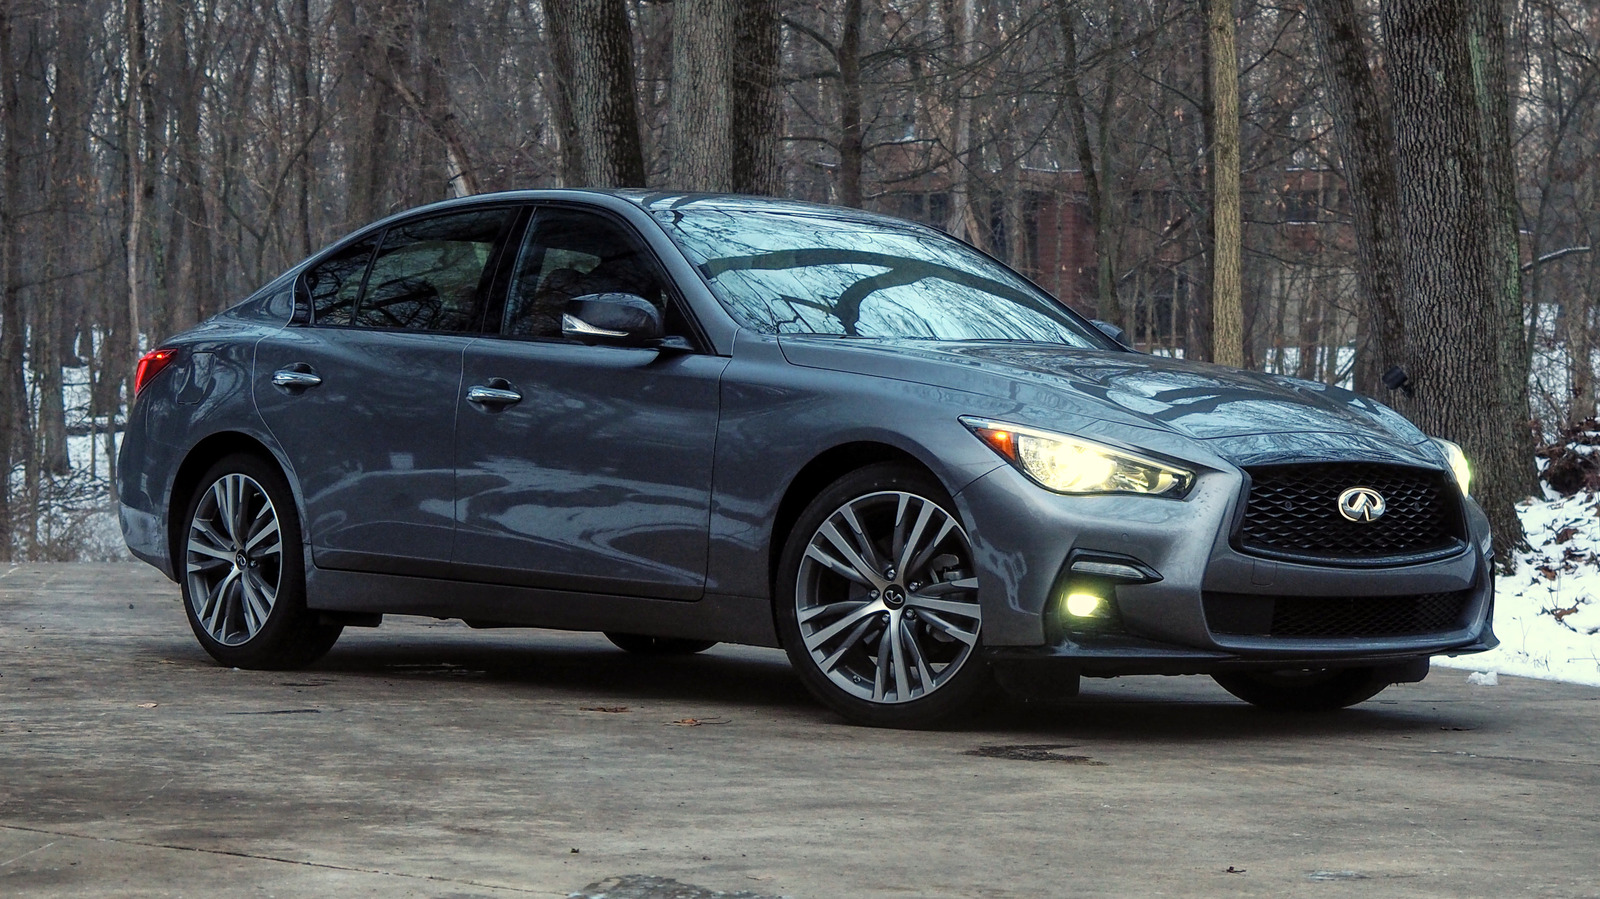 2023 Infiniti Q50 Review: Aging Out